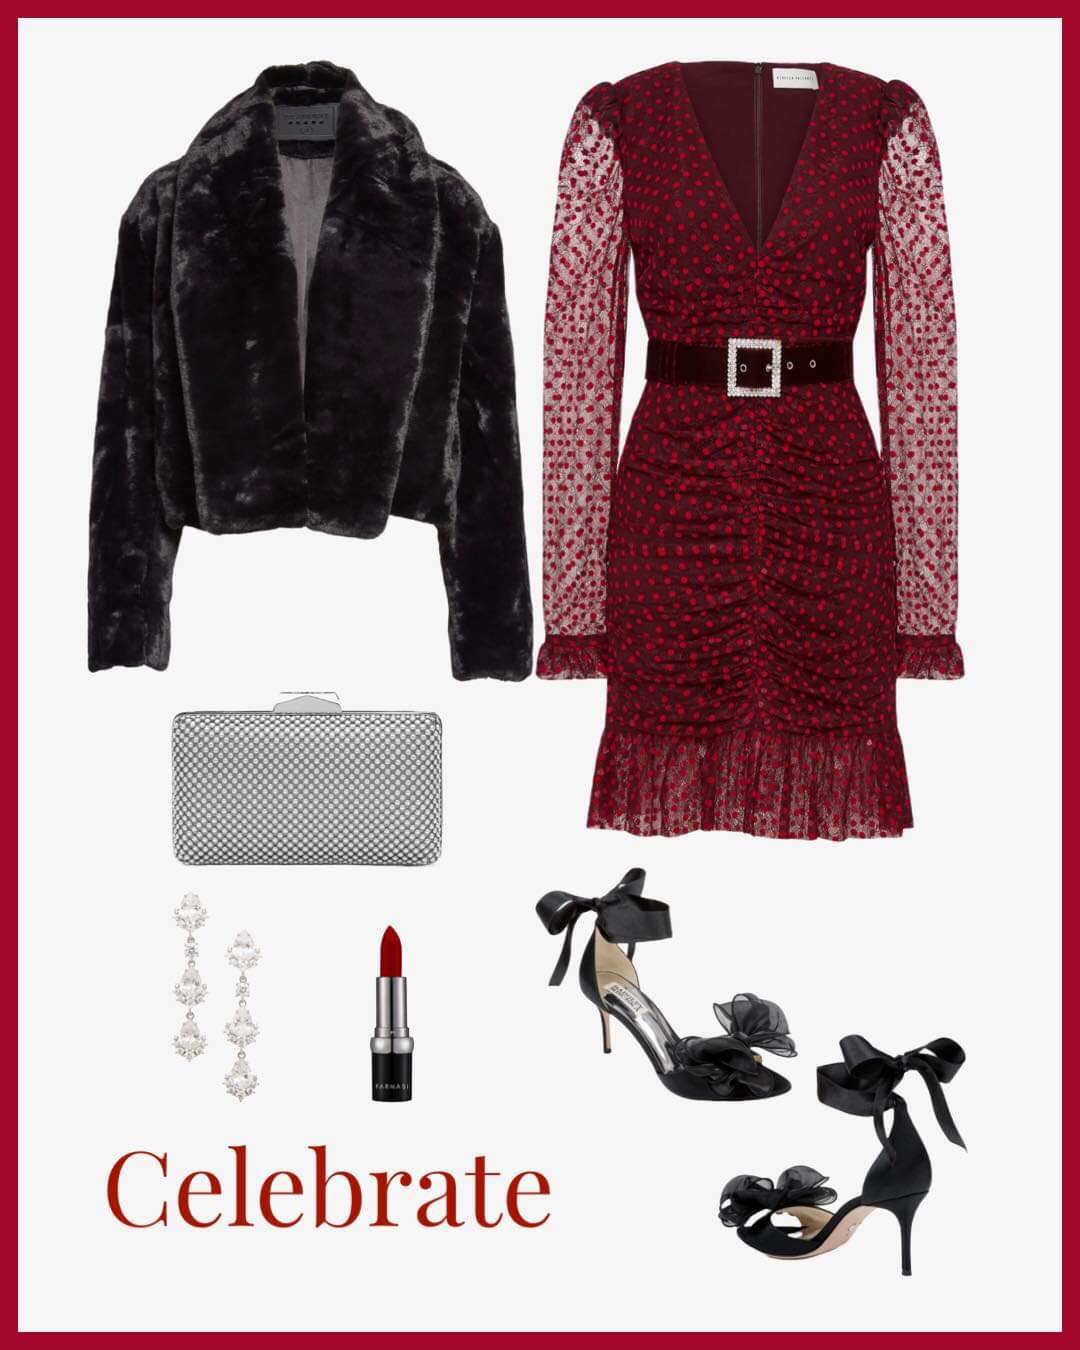 'Tis the Season! - Get Festive with these Holiday Outfit Ideas